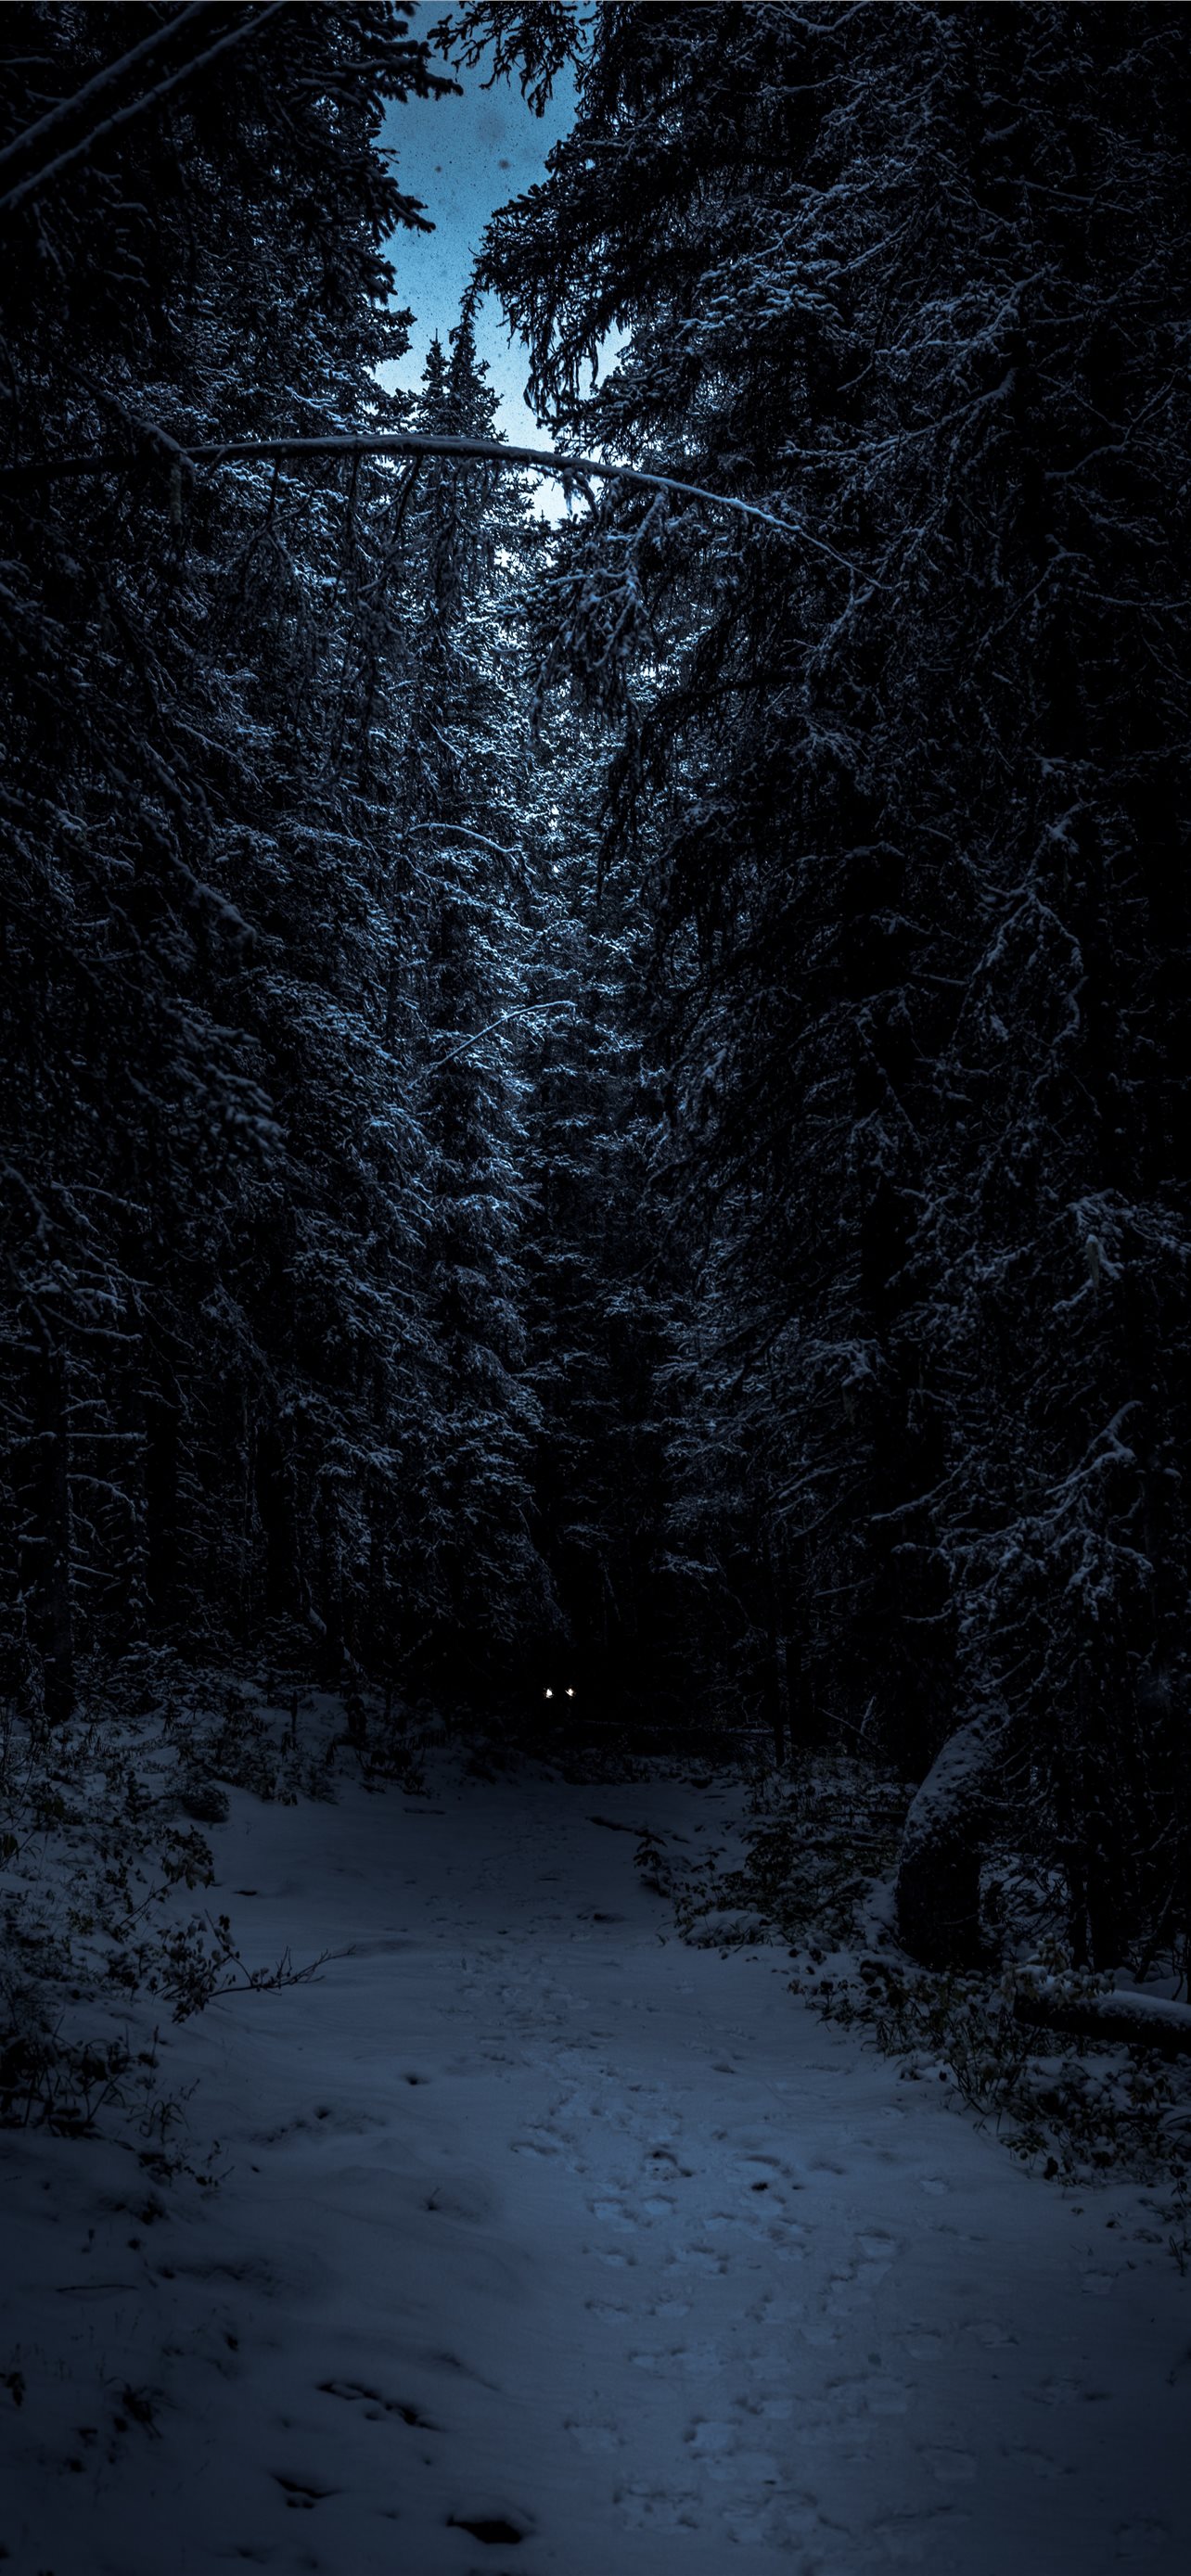 Snowy path in the forest at night - Forest